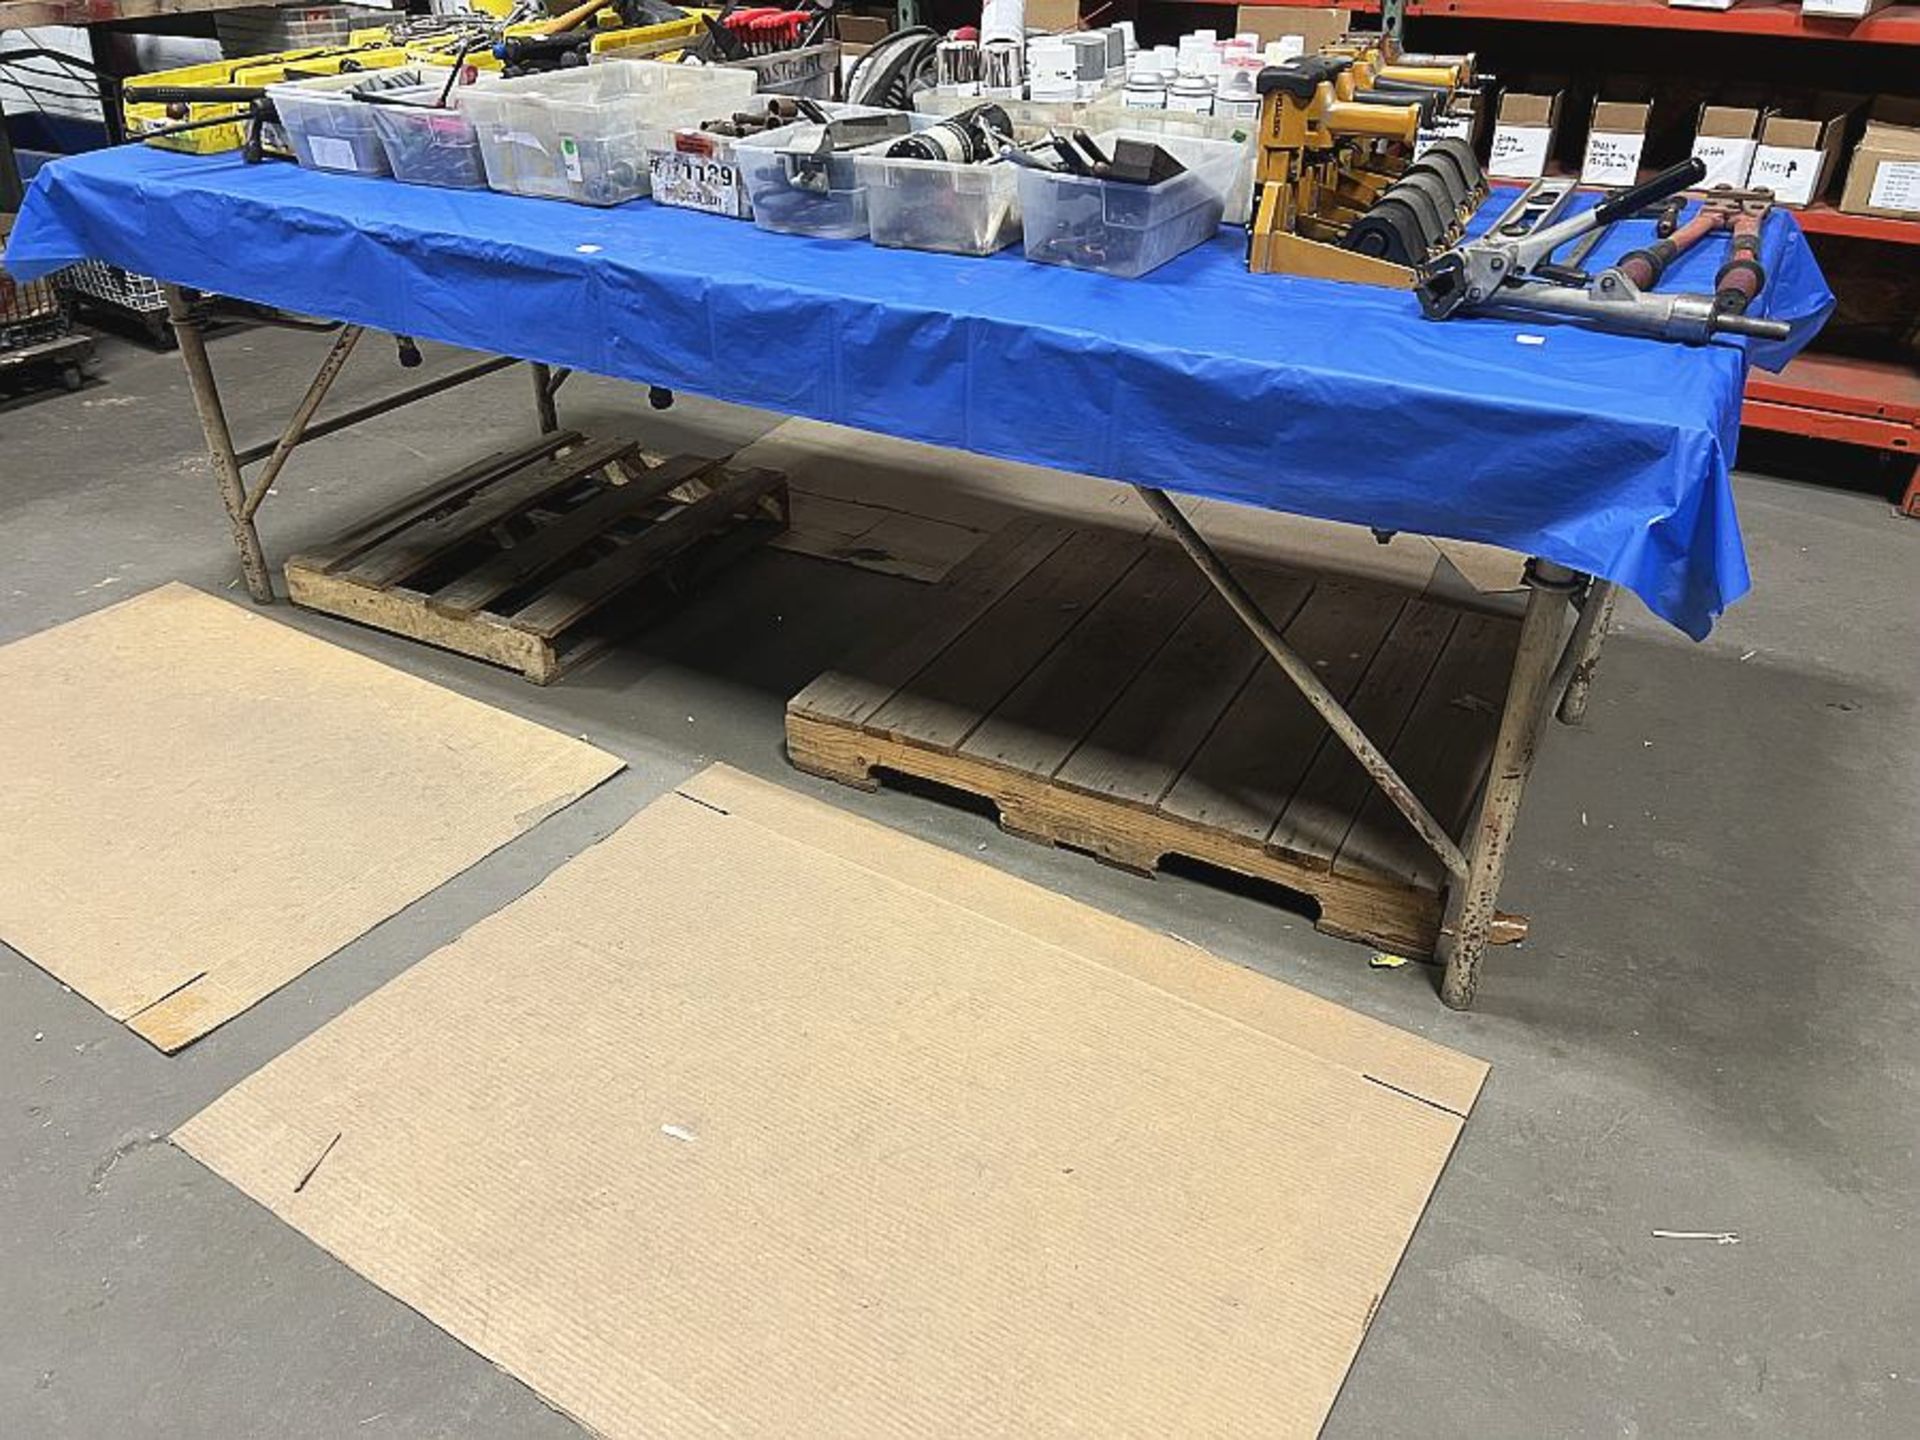 8' Work Table, Metal Frame/Wooden Top- no contents included